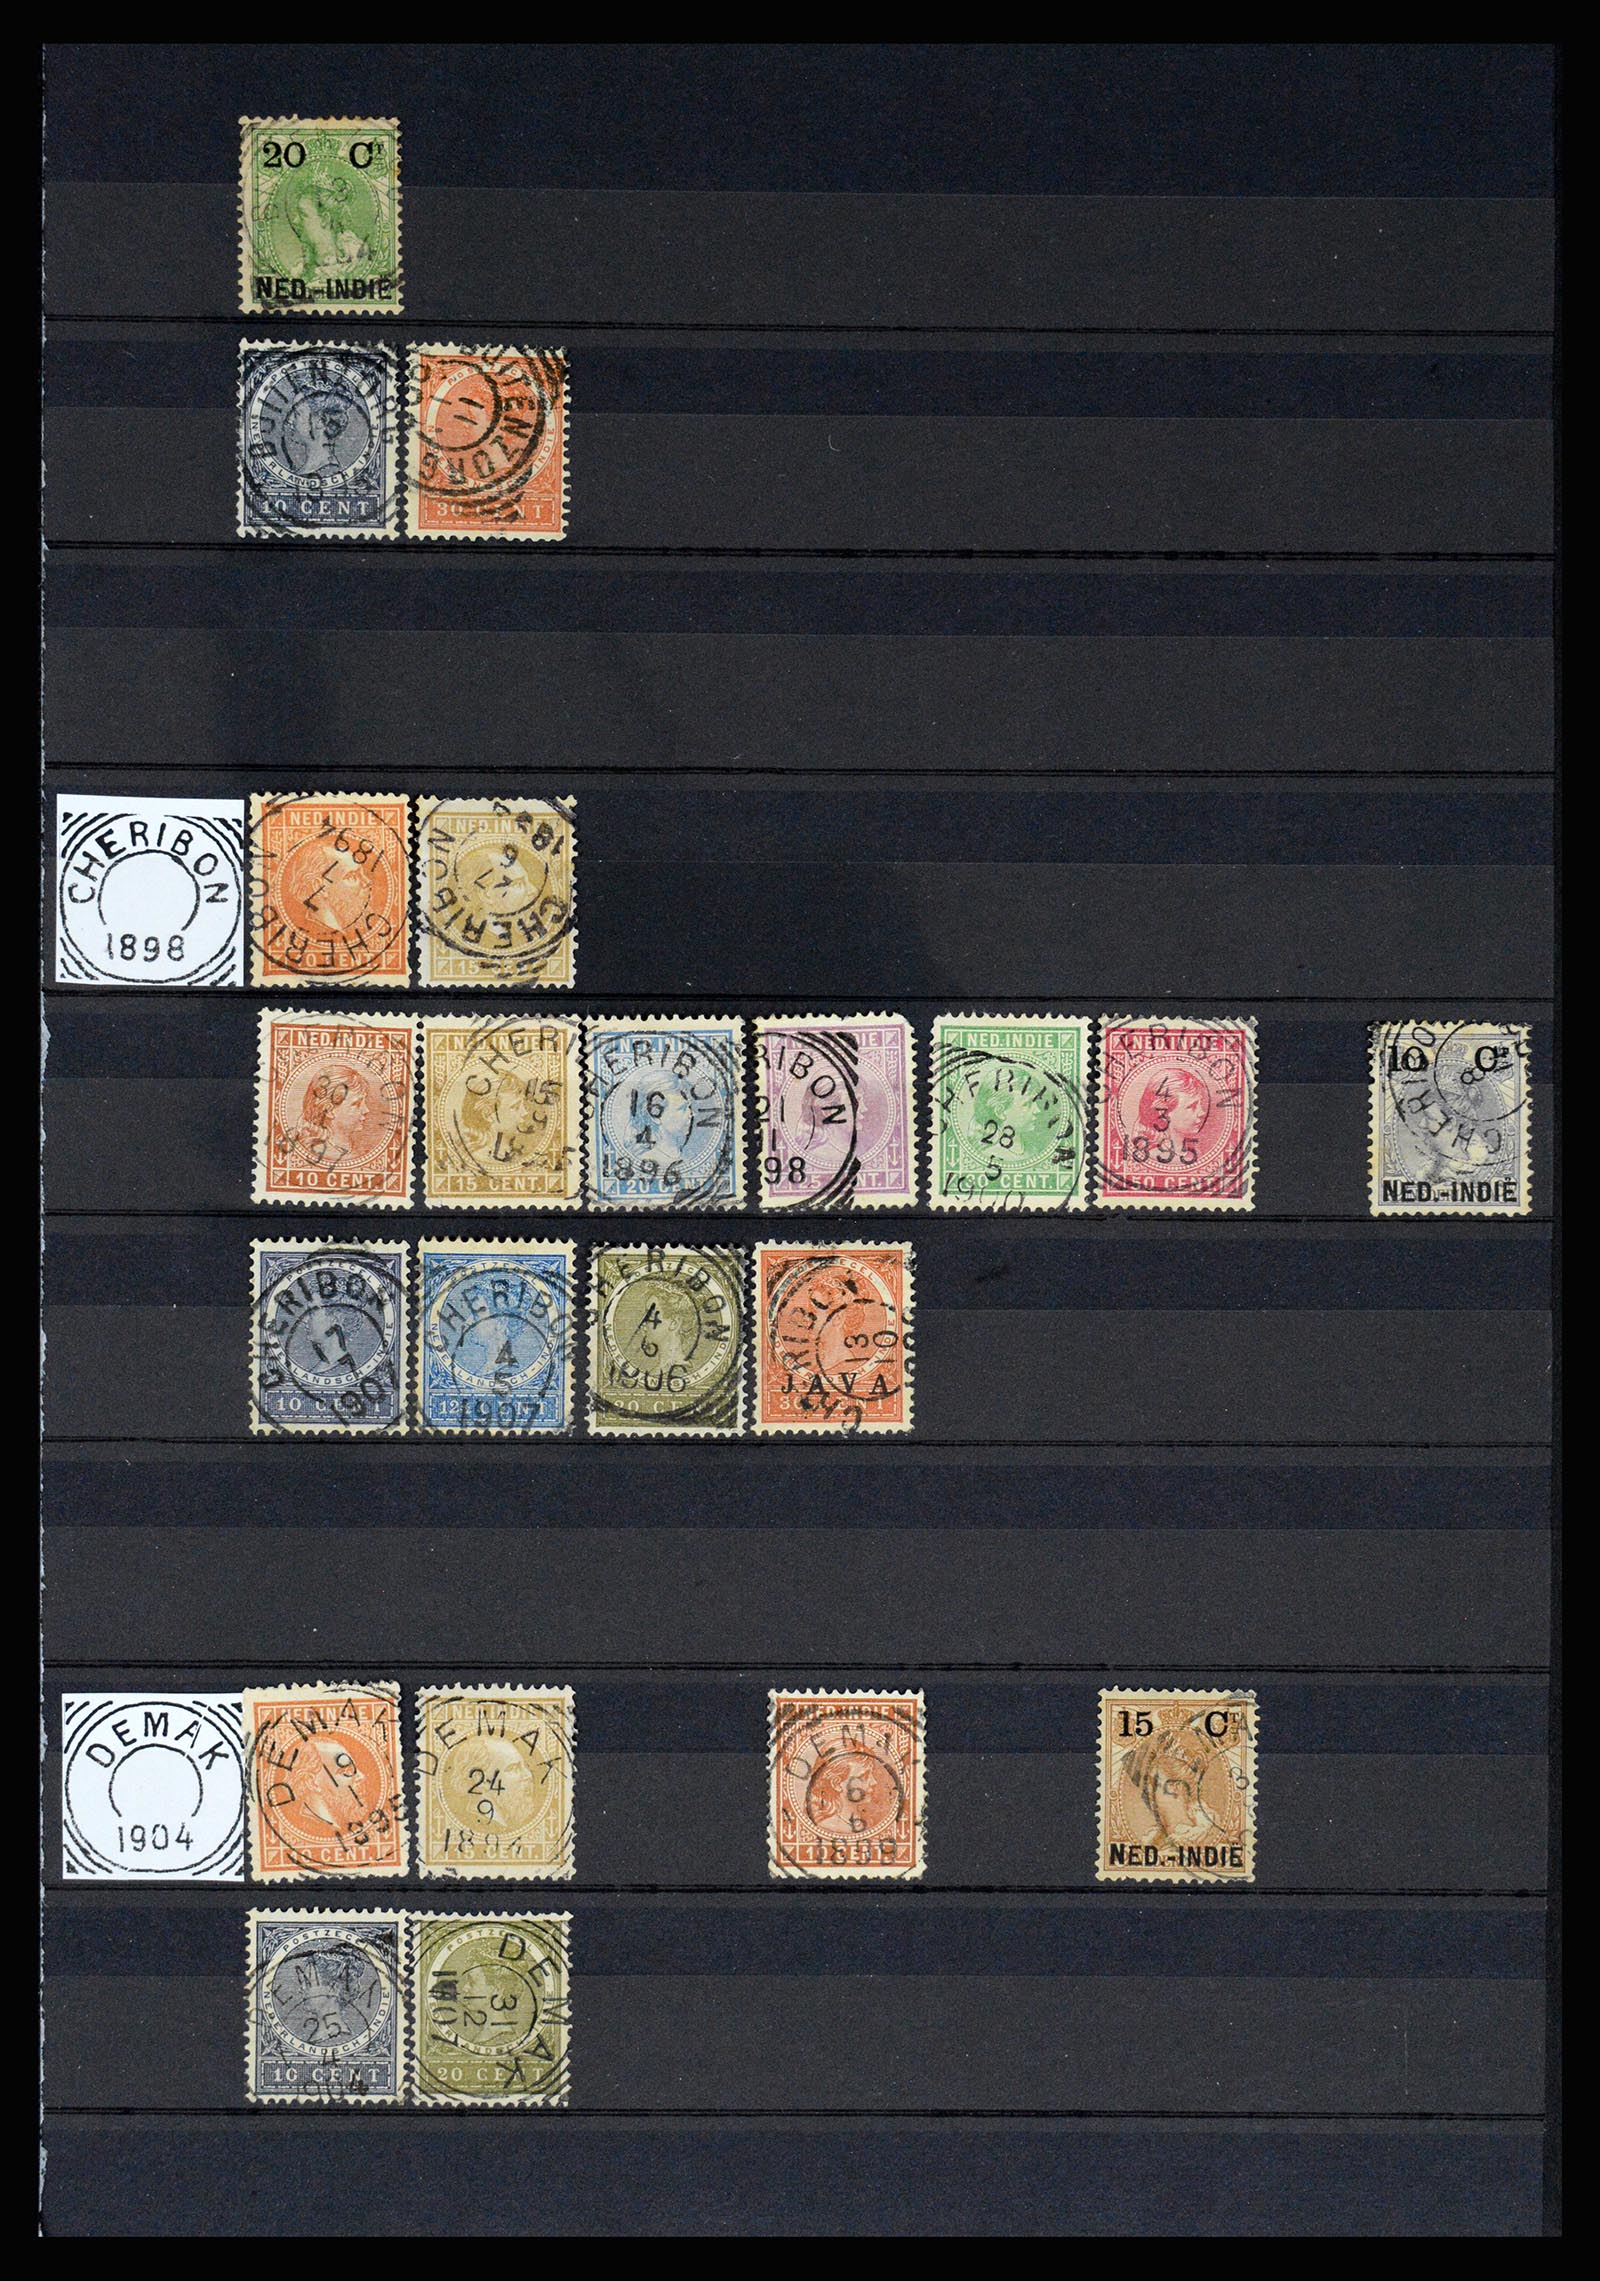 36839 012 - Stamp collection 36839 Dutch east Indies square cancels.